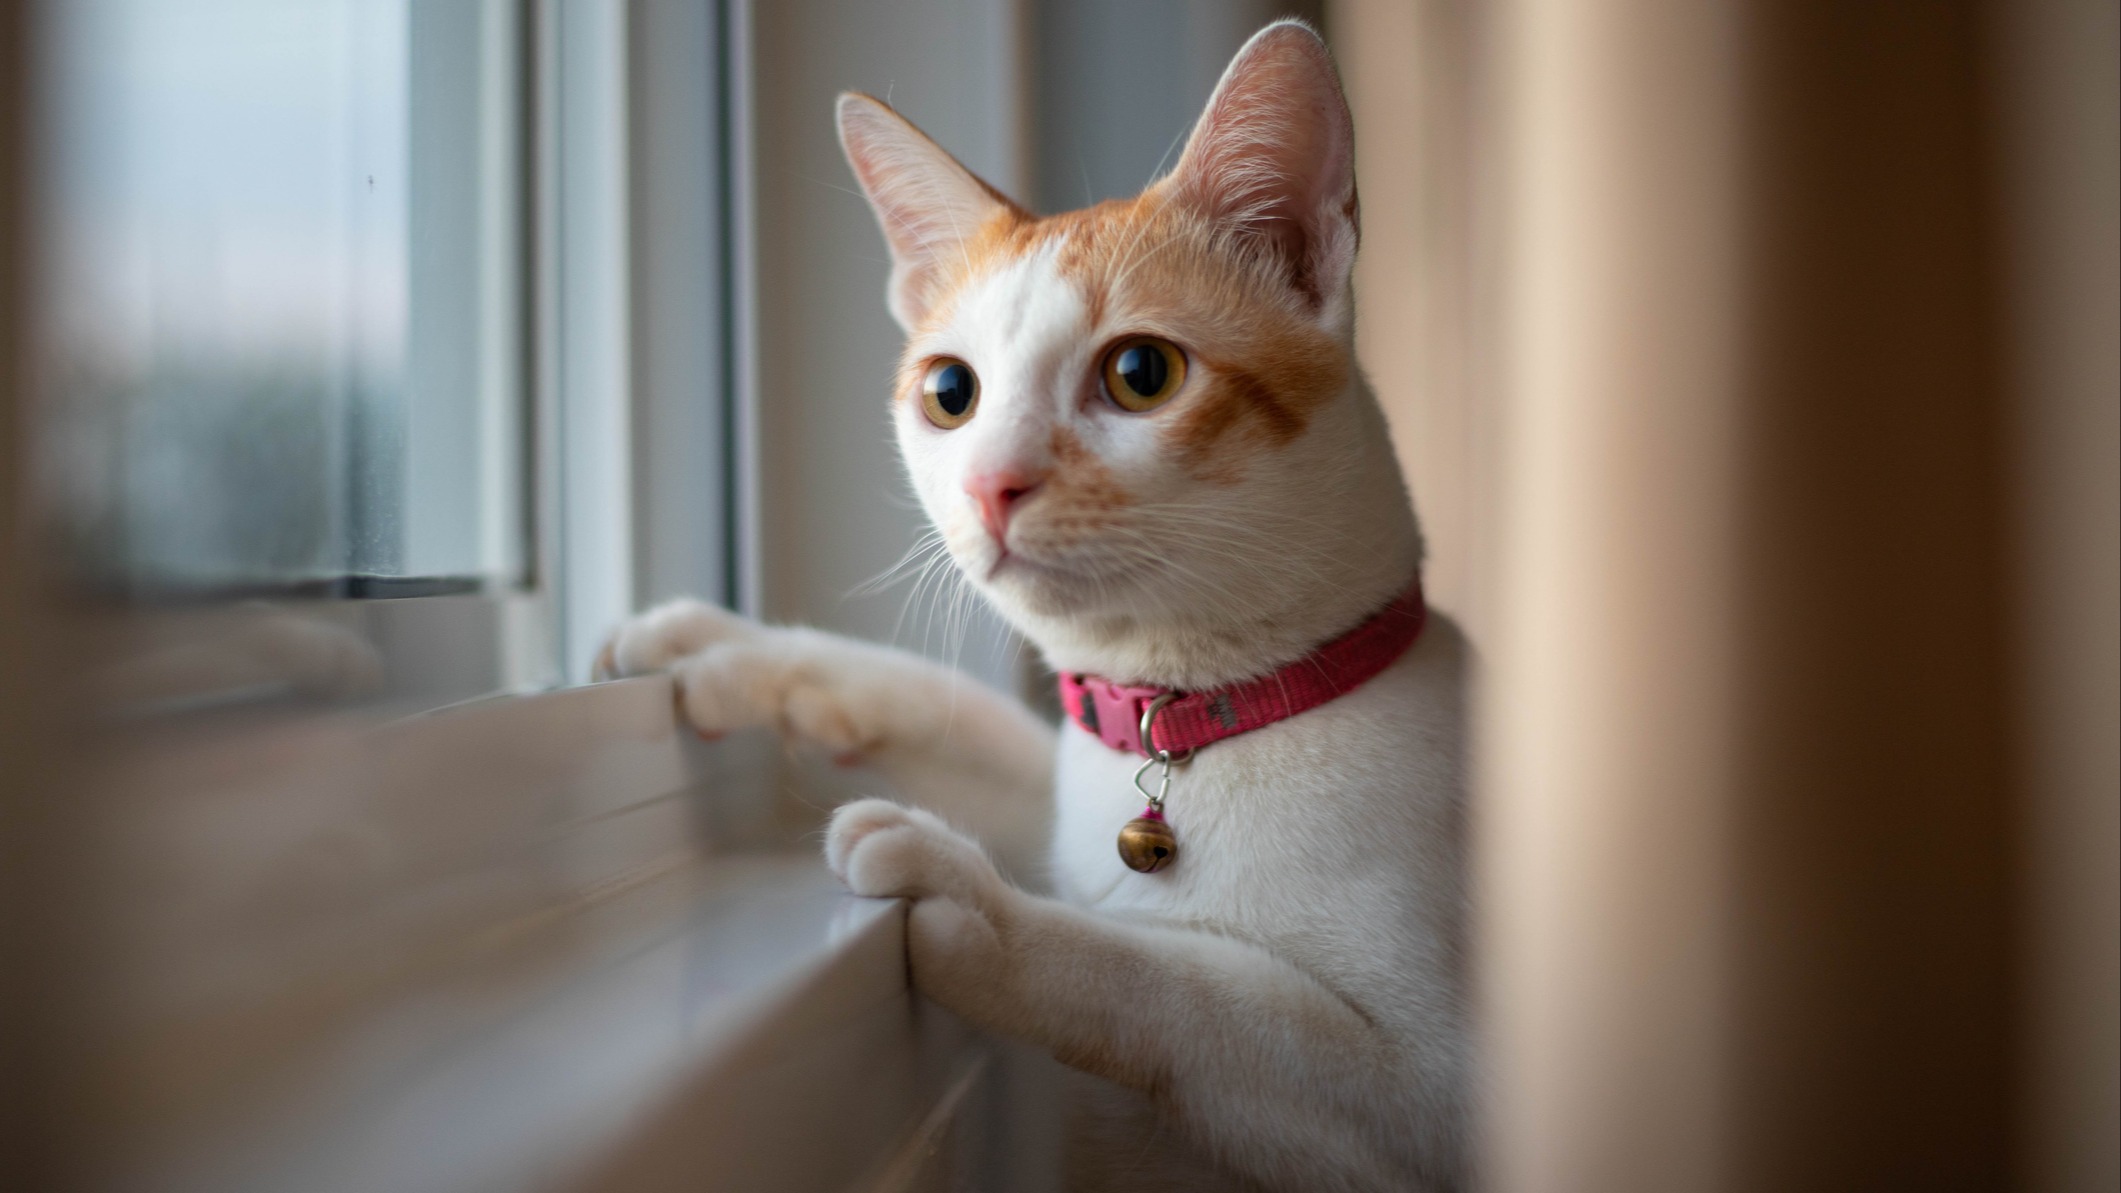 What are some common facial expressions and behaviors of cats that are  often misinterpreted, and how can understanding them lead to a better  relationship with feline pets? - Quora